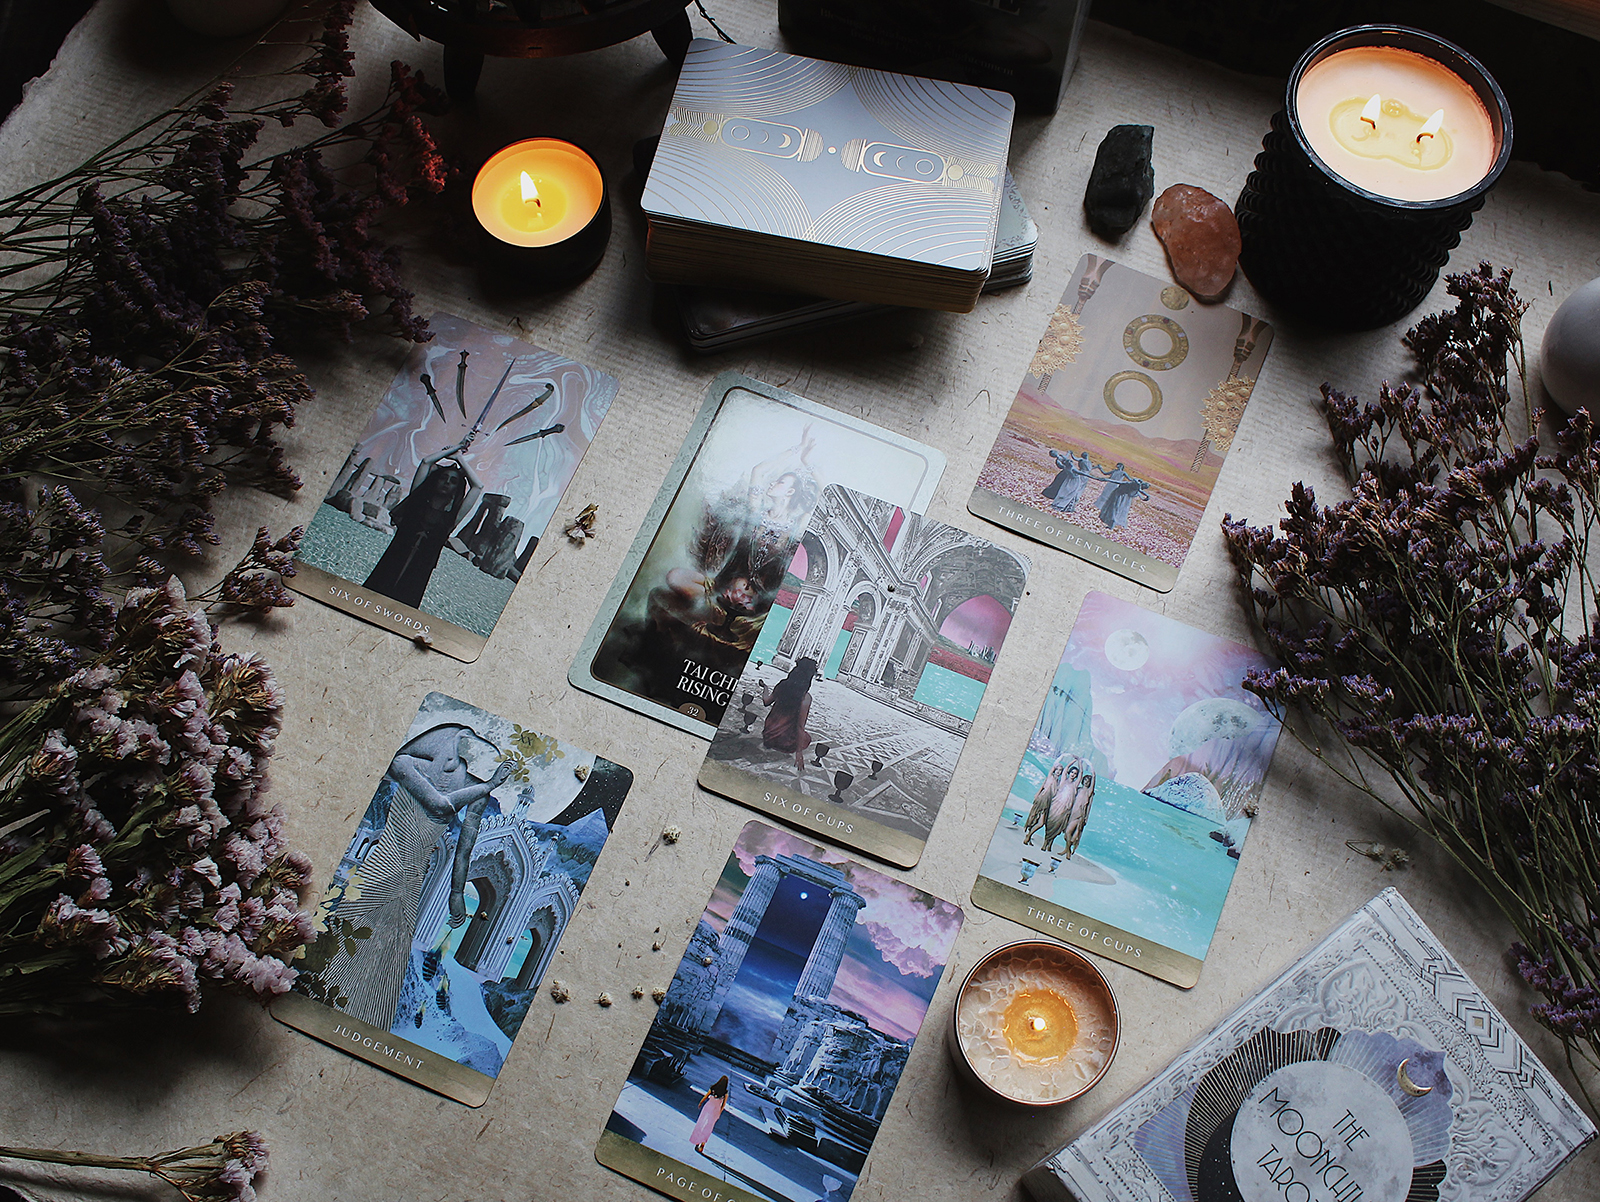 A tarot card reading using the Moonchild Tarot deck. Photo courtesy of Lorraine Anderson